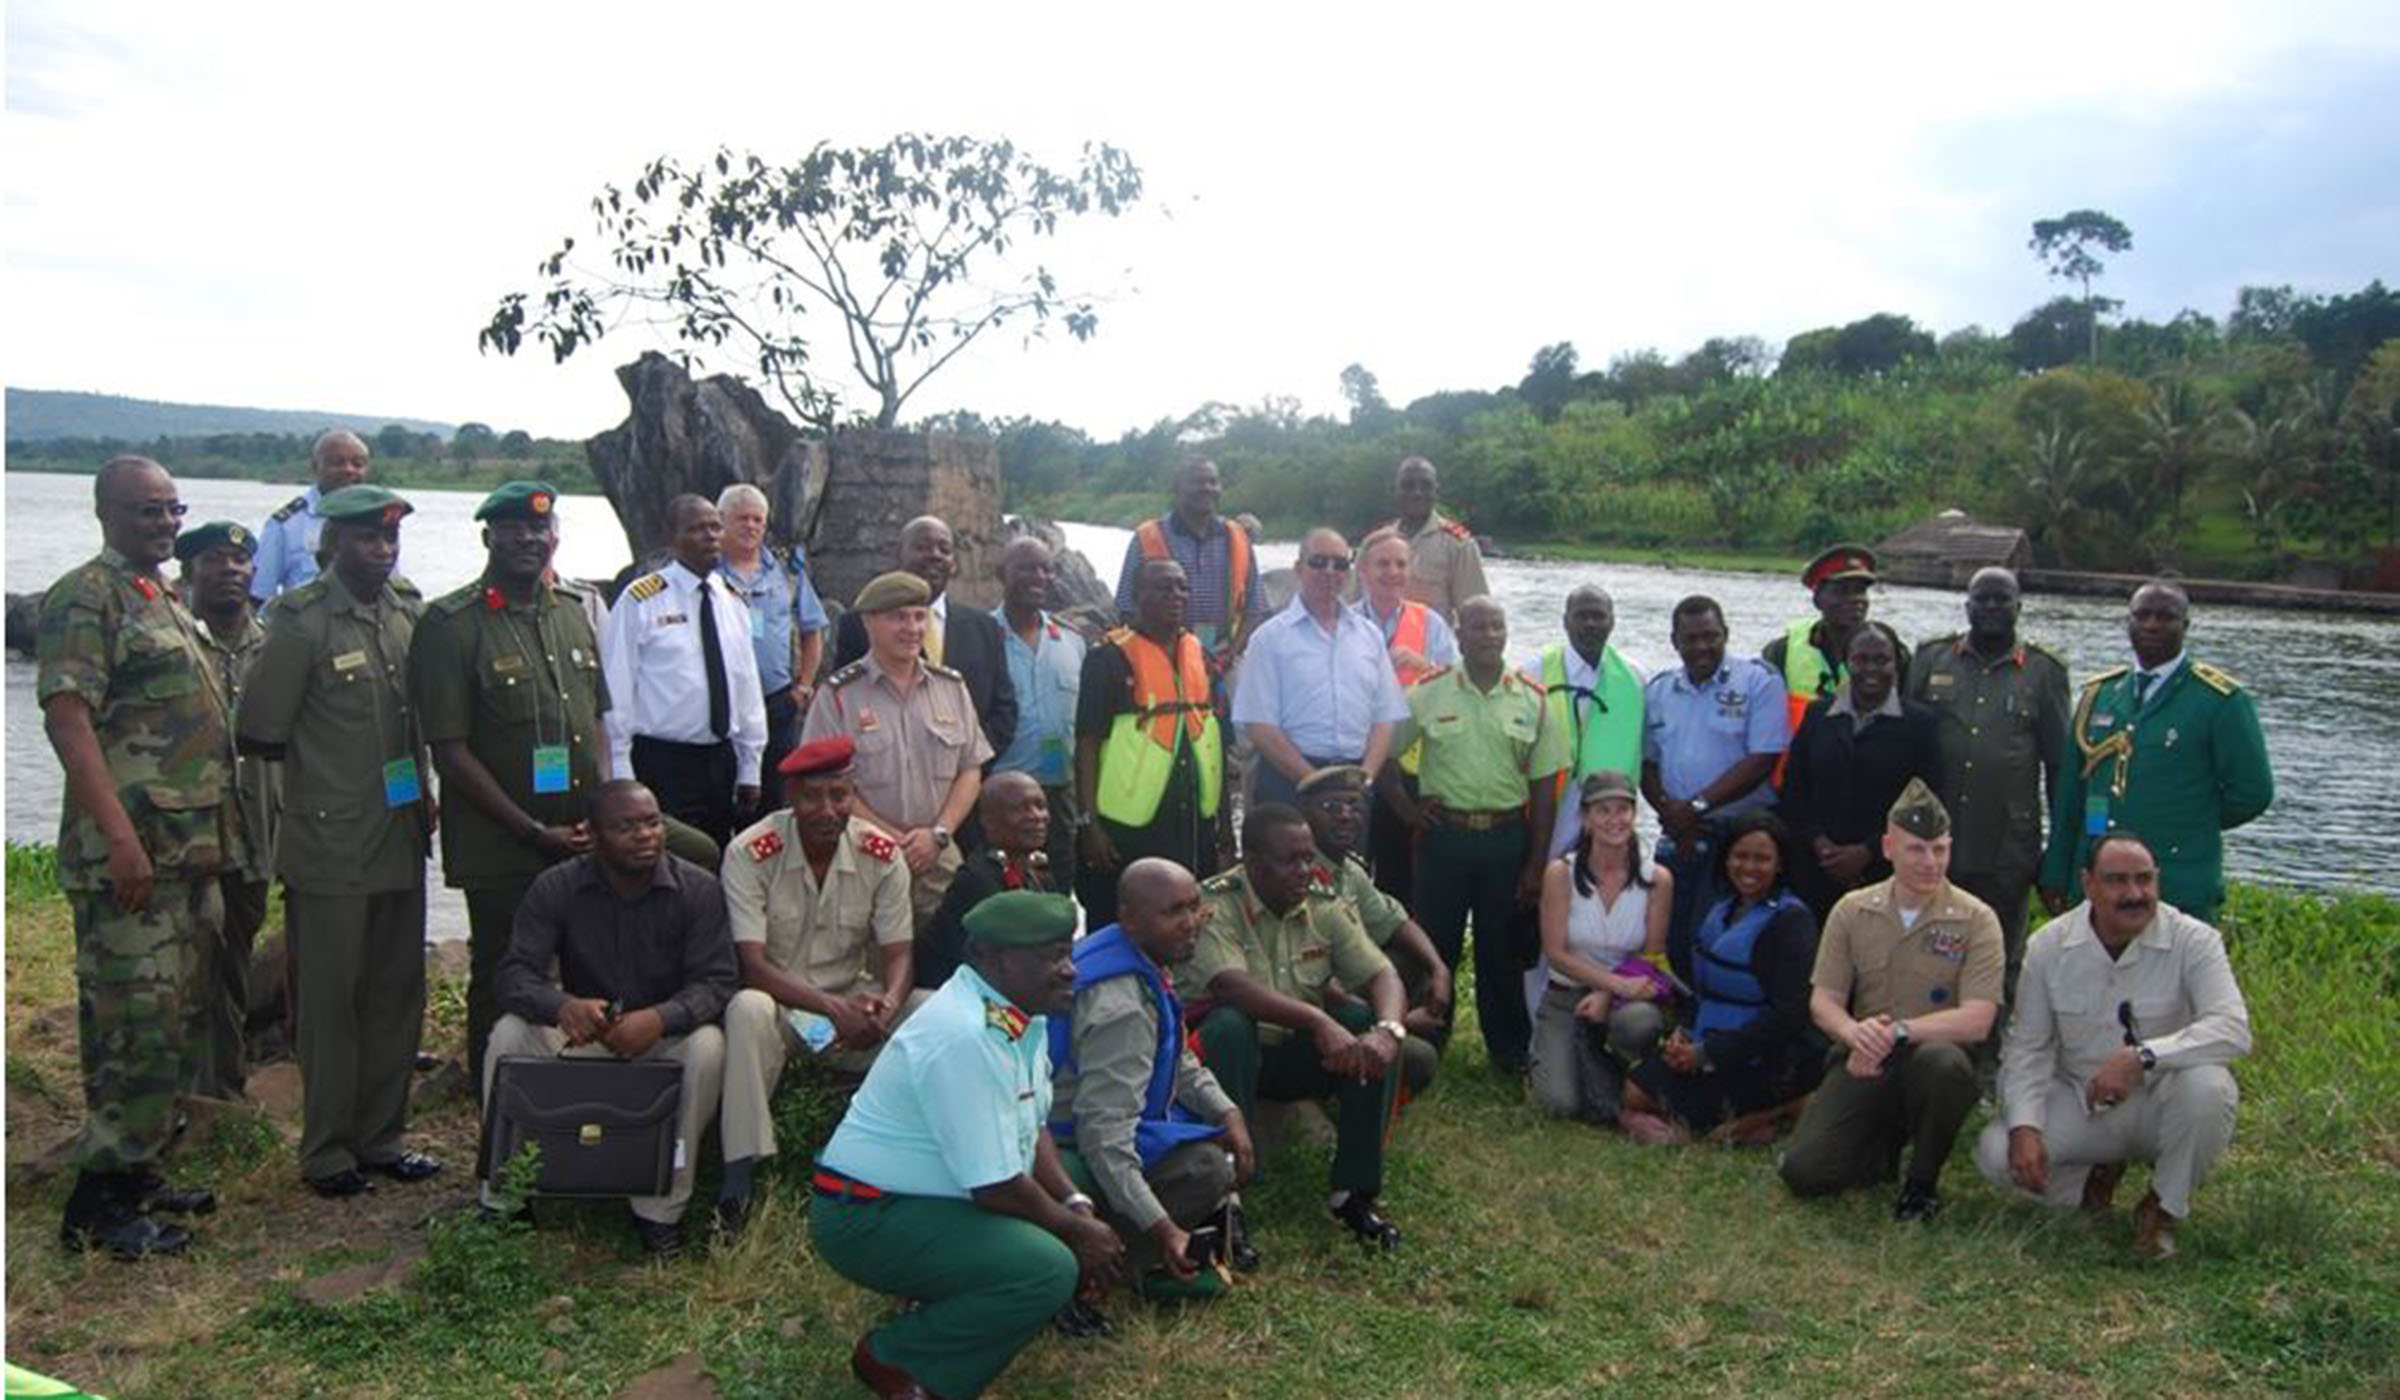 In this 2010 photo from an excursion of the River Nile in Uganda, the author is seated left with a briefcase; standing right behind him is Col. Stephen Oluka; while Col. Kasiita is 2nd left, third row; with Gen Gutti standing in the 2nd row, second right. / Courtesy